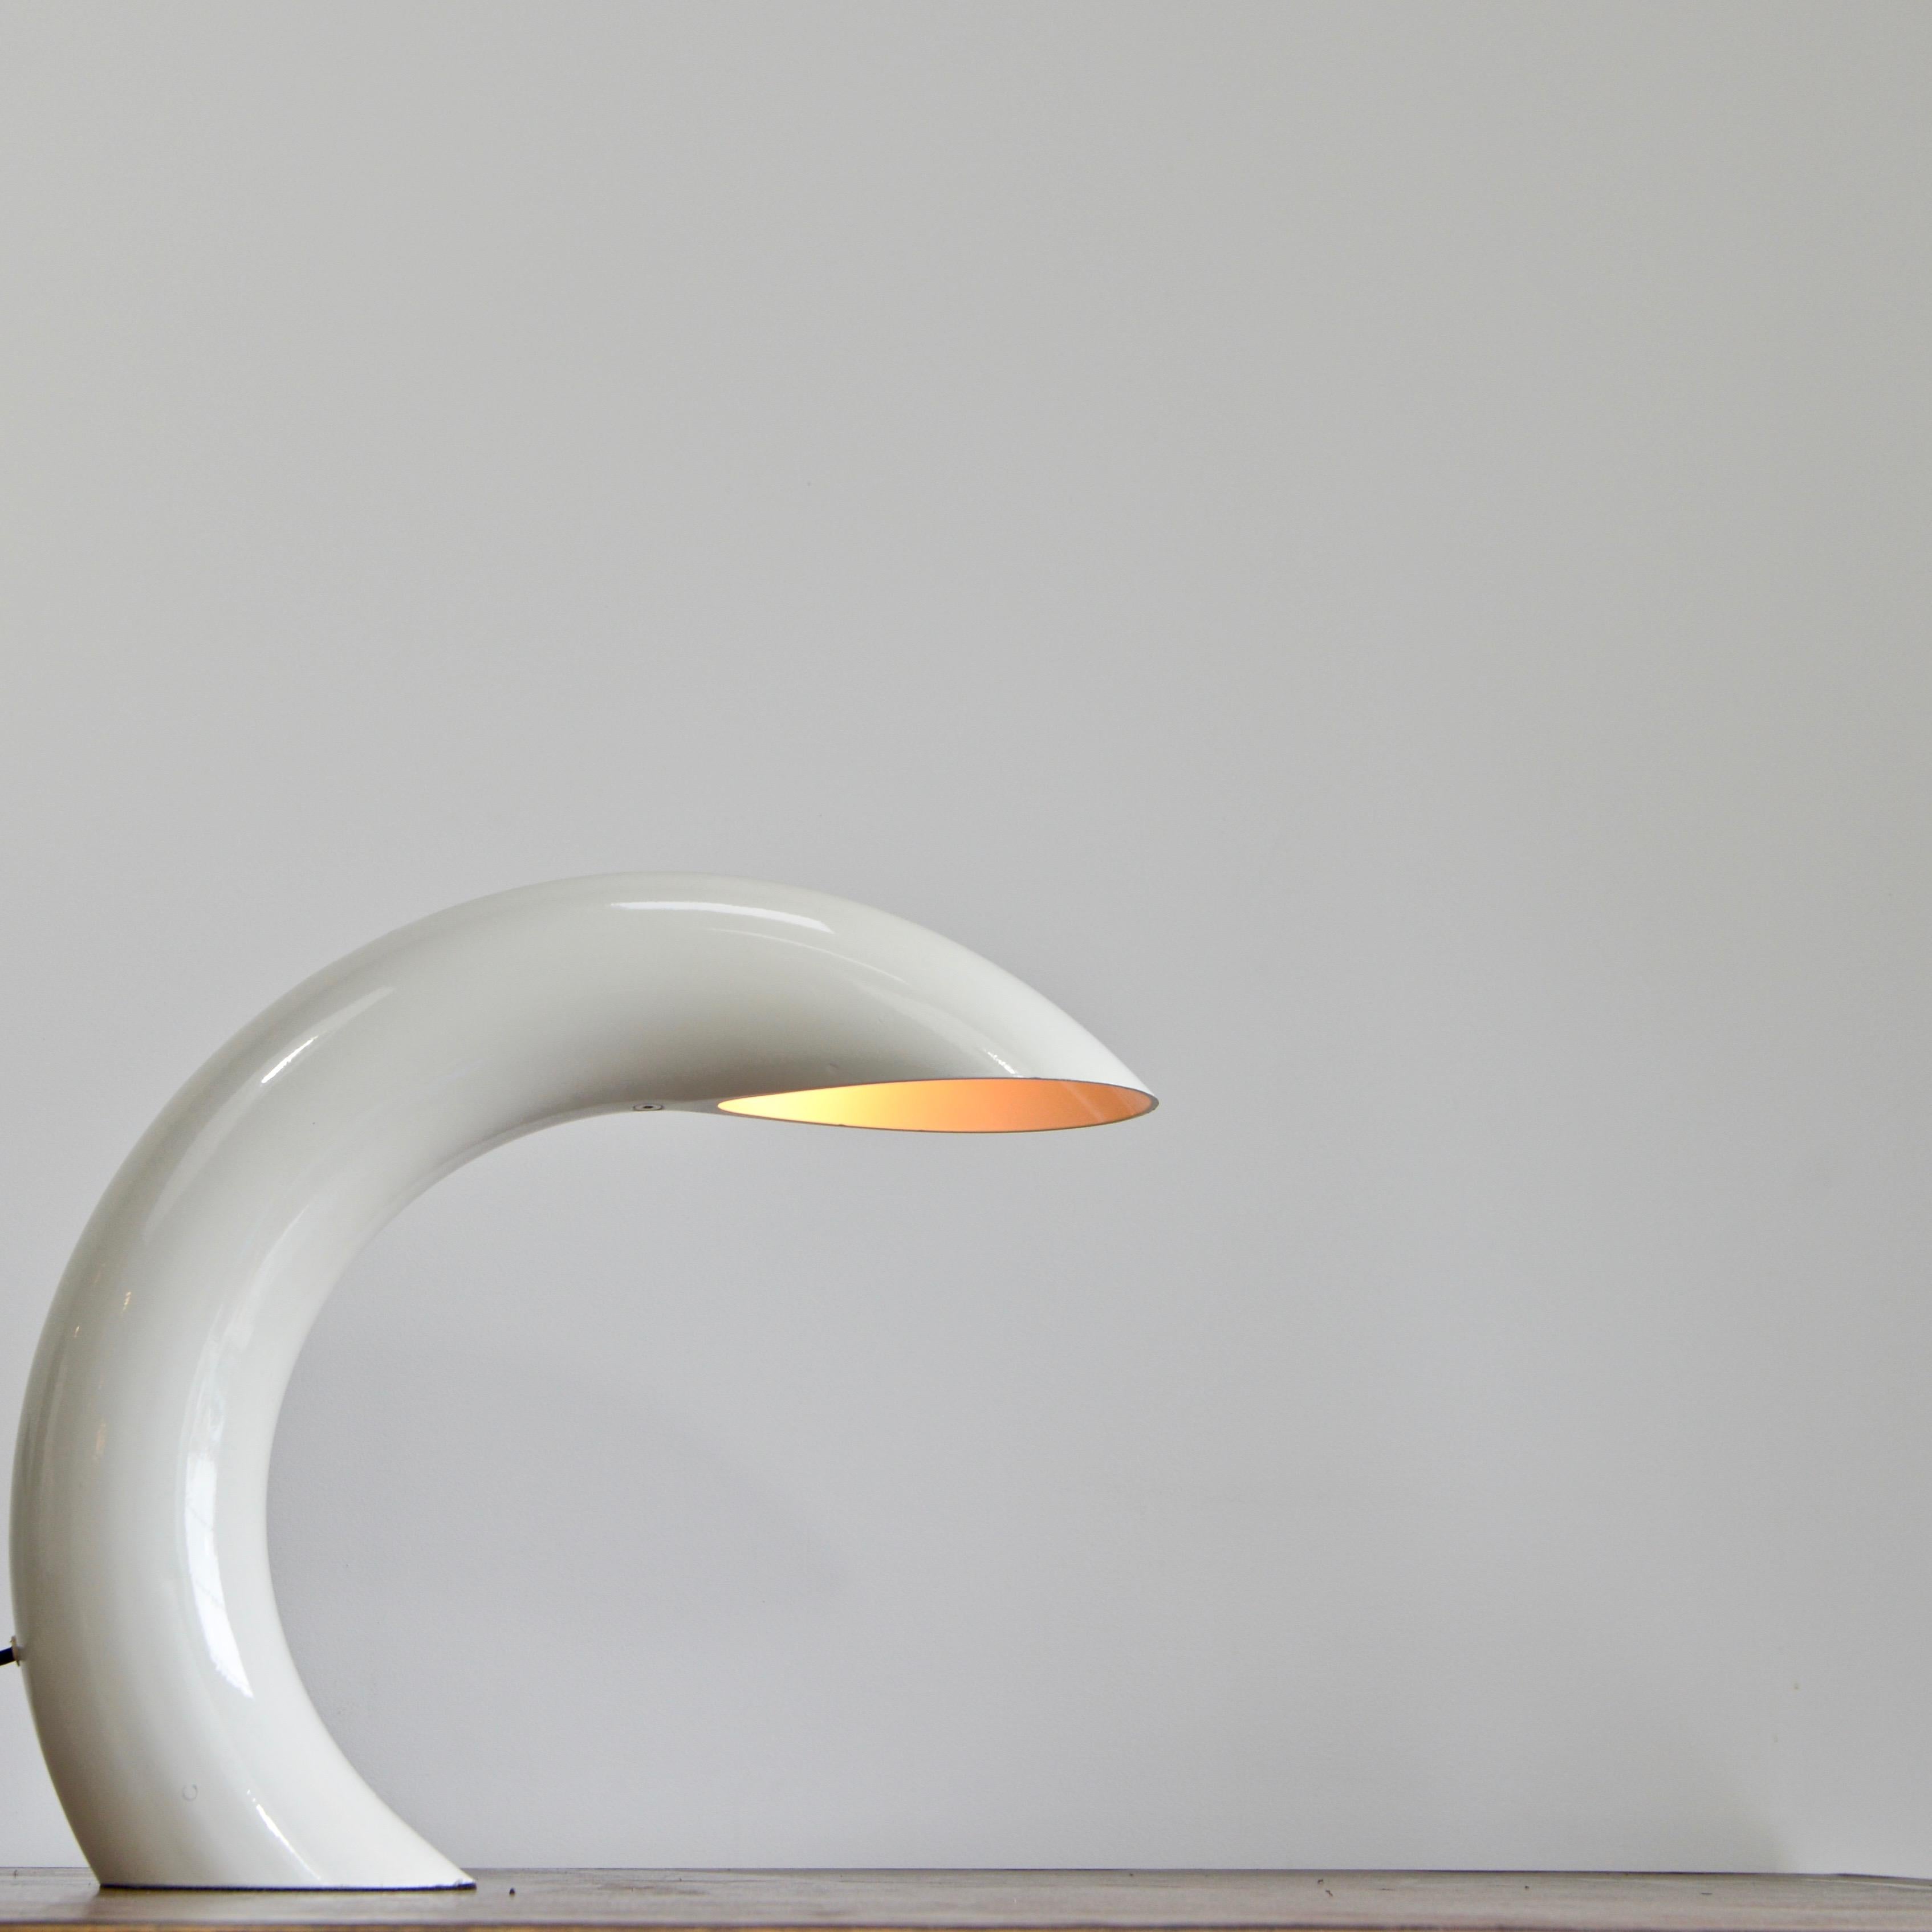 Vintage sculptural 1960s white arc table lamp from France by Georges Frydman. Fully rewired with a single E26 medium based socket, ready to be used in the USA. Finish: Aluminum and steel. Measurements:
Measures: Height 16”
Wide 17.5”.